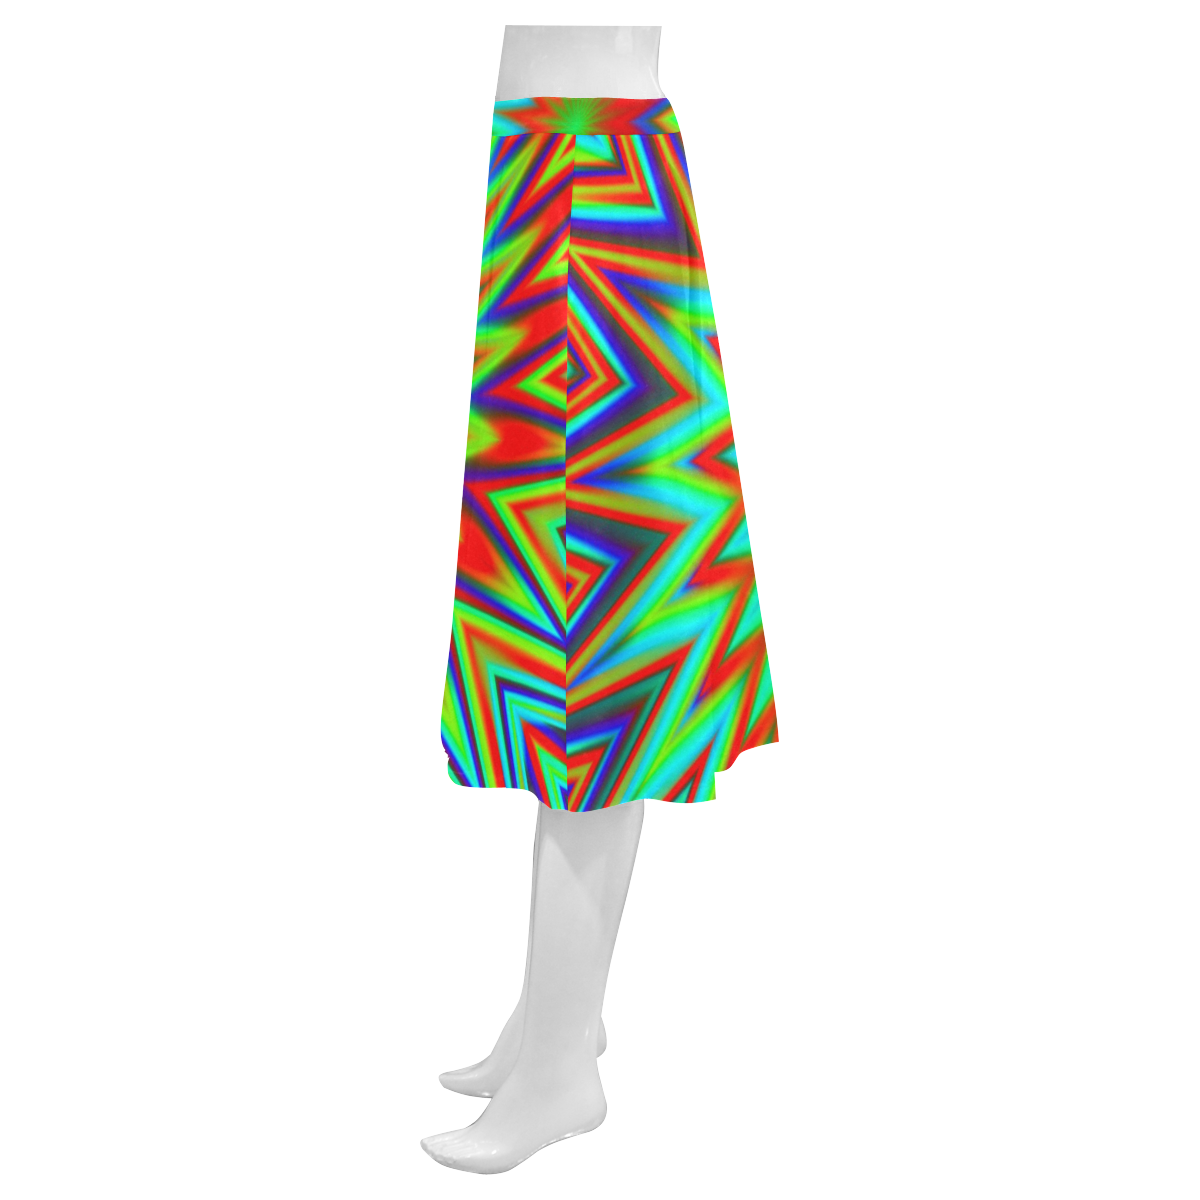 Red Yellow Blue Green Retro Color Explosion Mnemosyne Women's Crepe Skirt (Model D16)